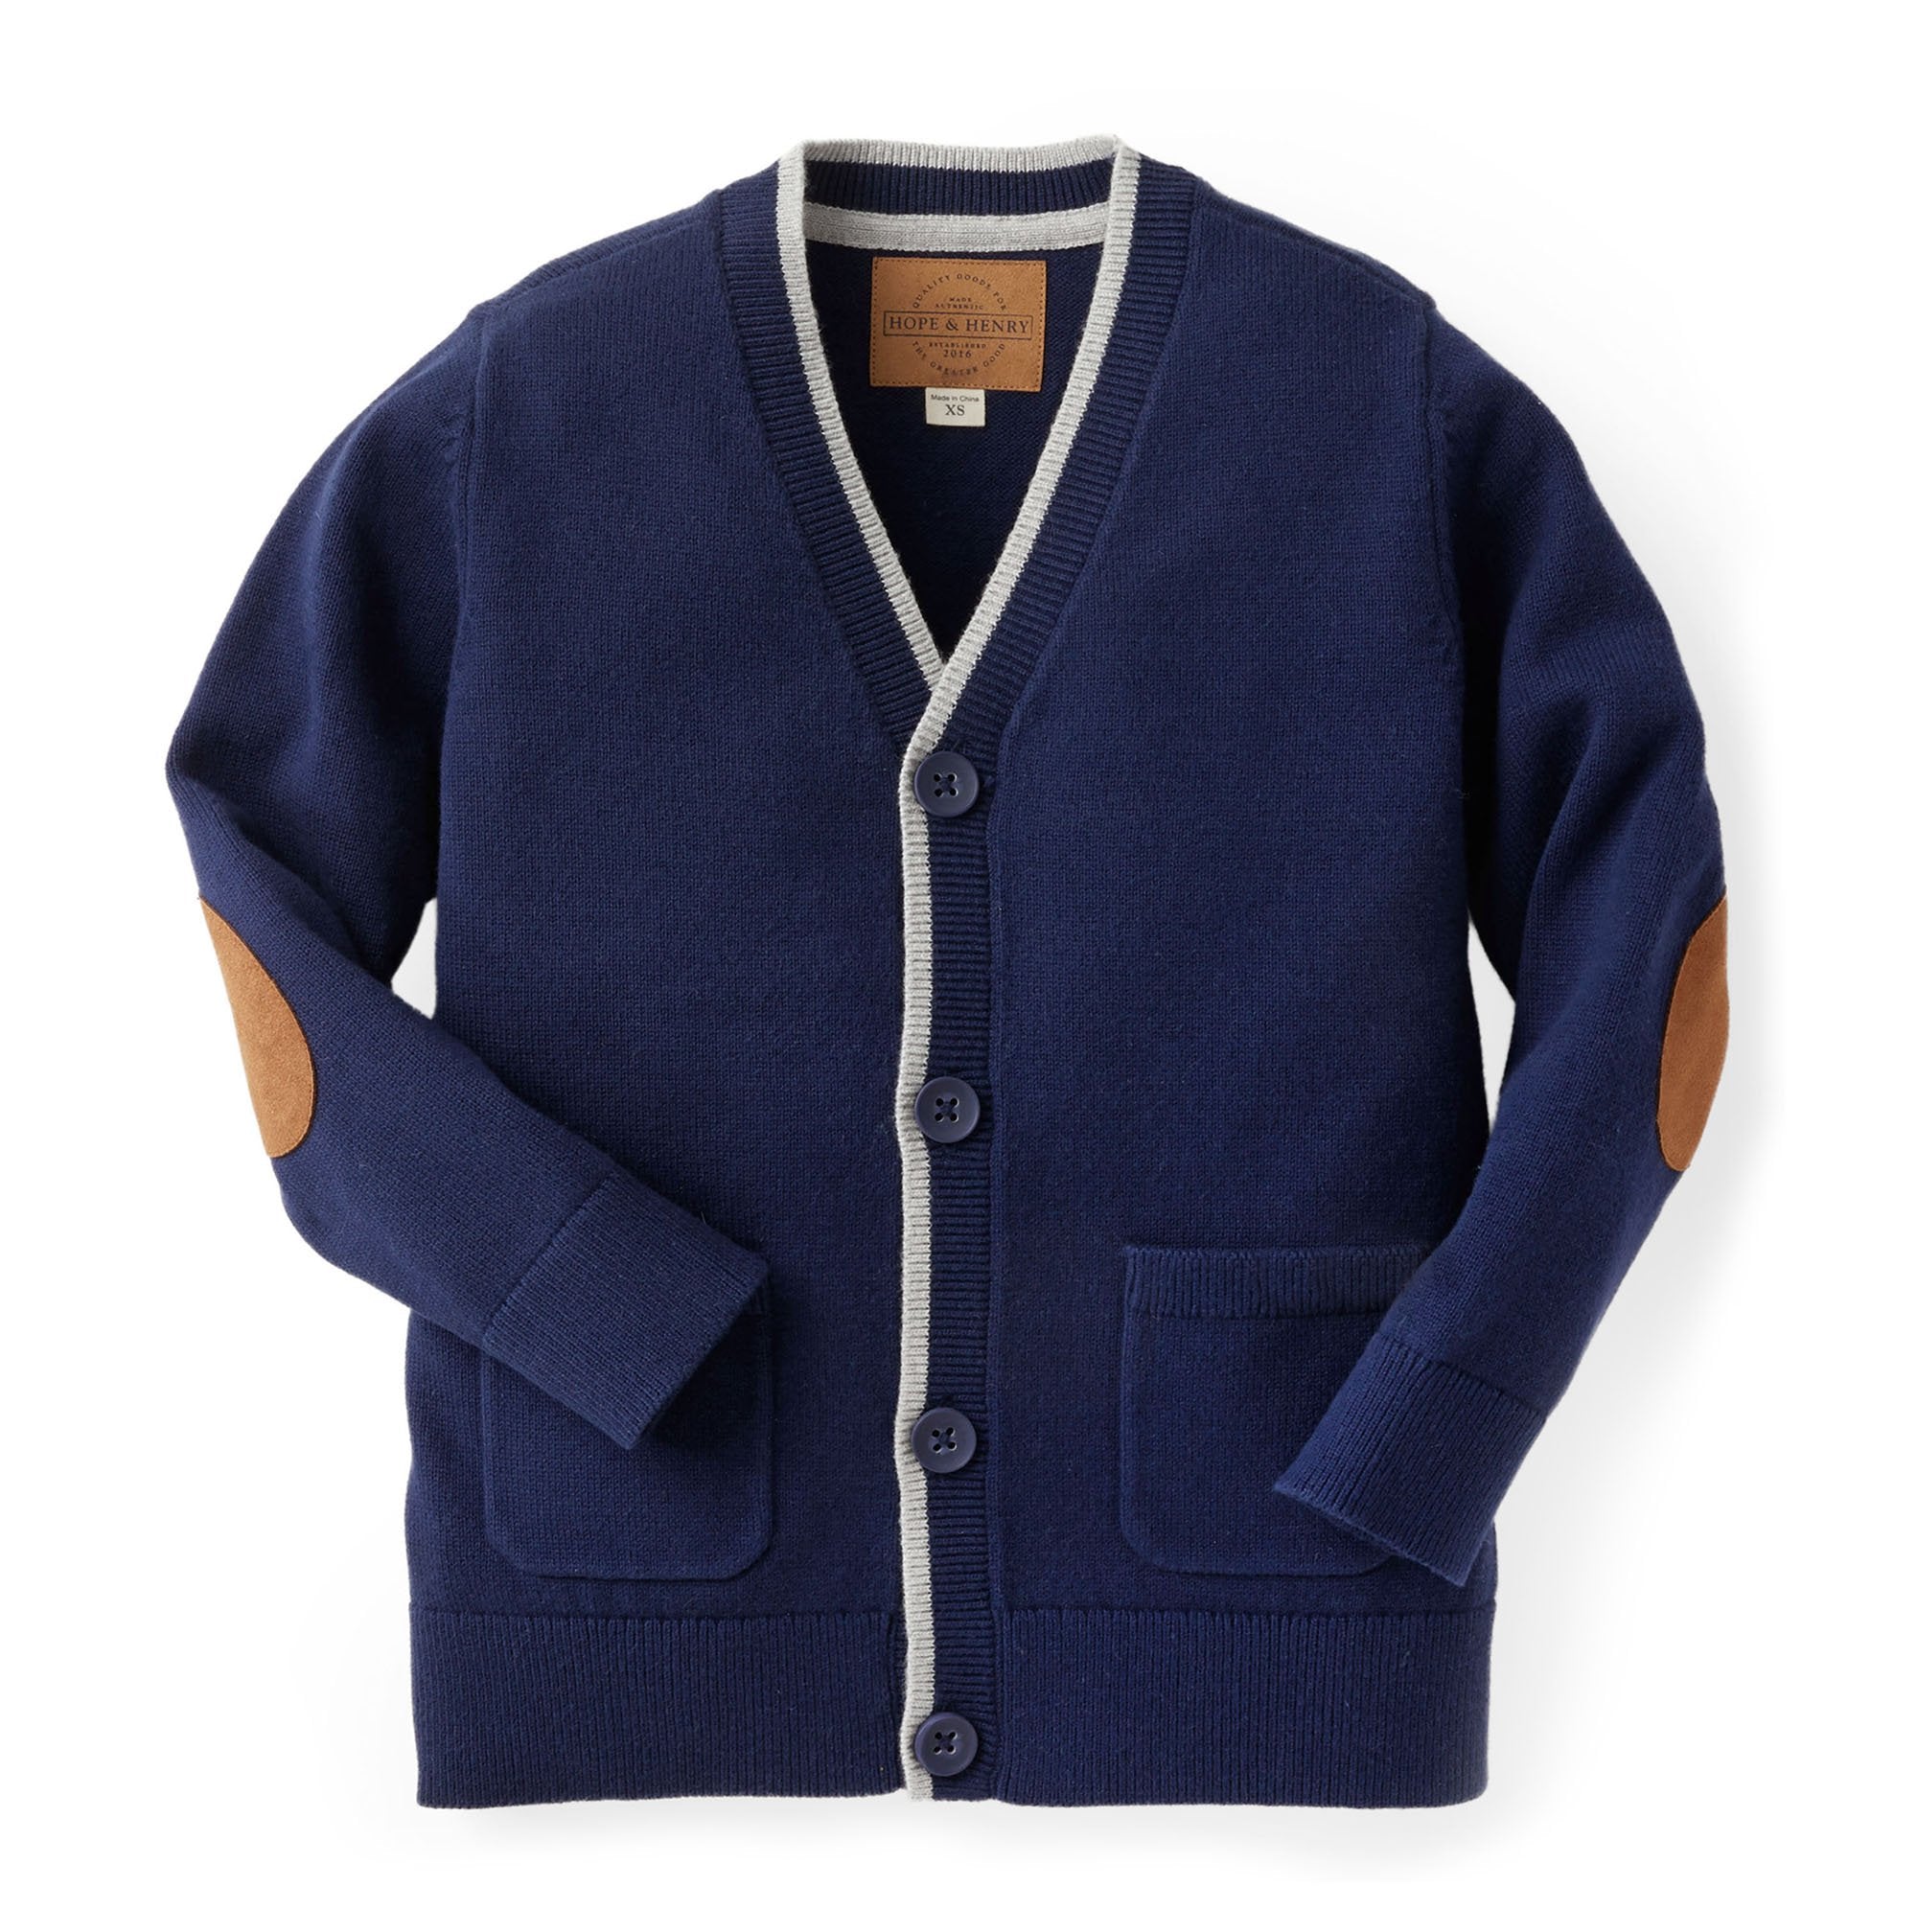 Hope & Henry Baby Boys Tipped Cardigan with Elbow Patches - Navy